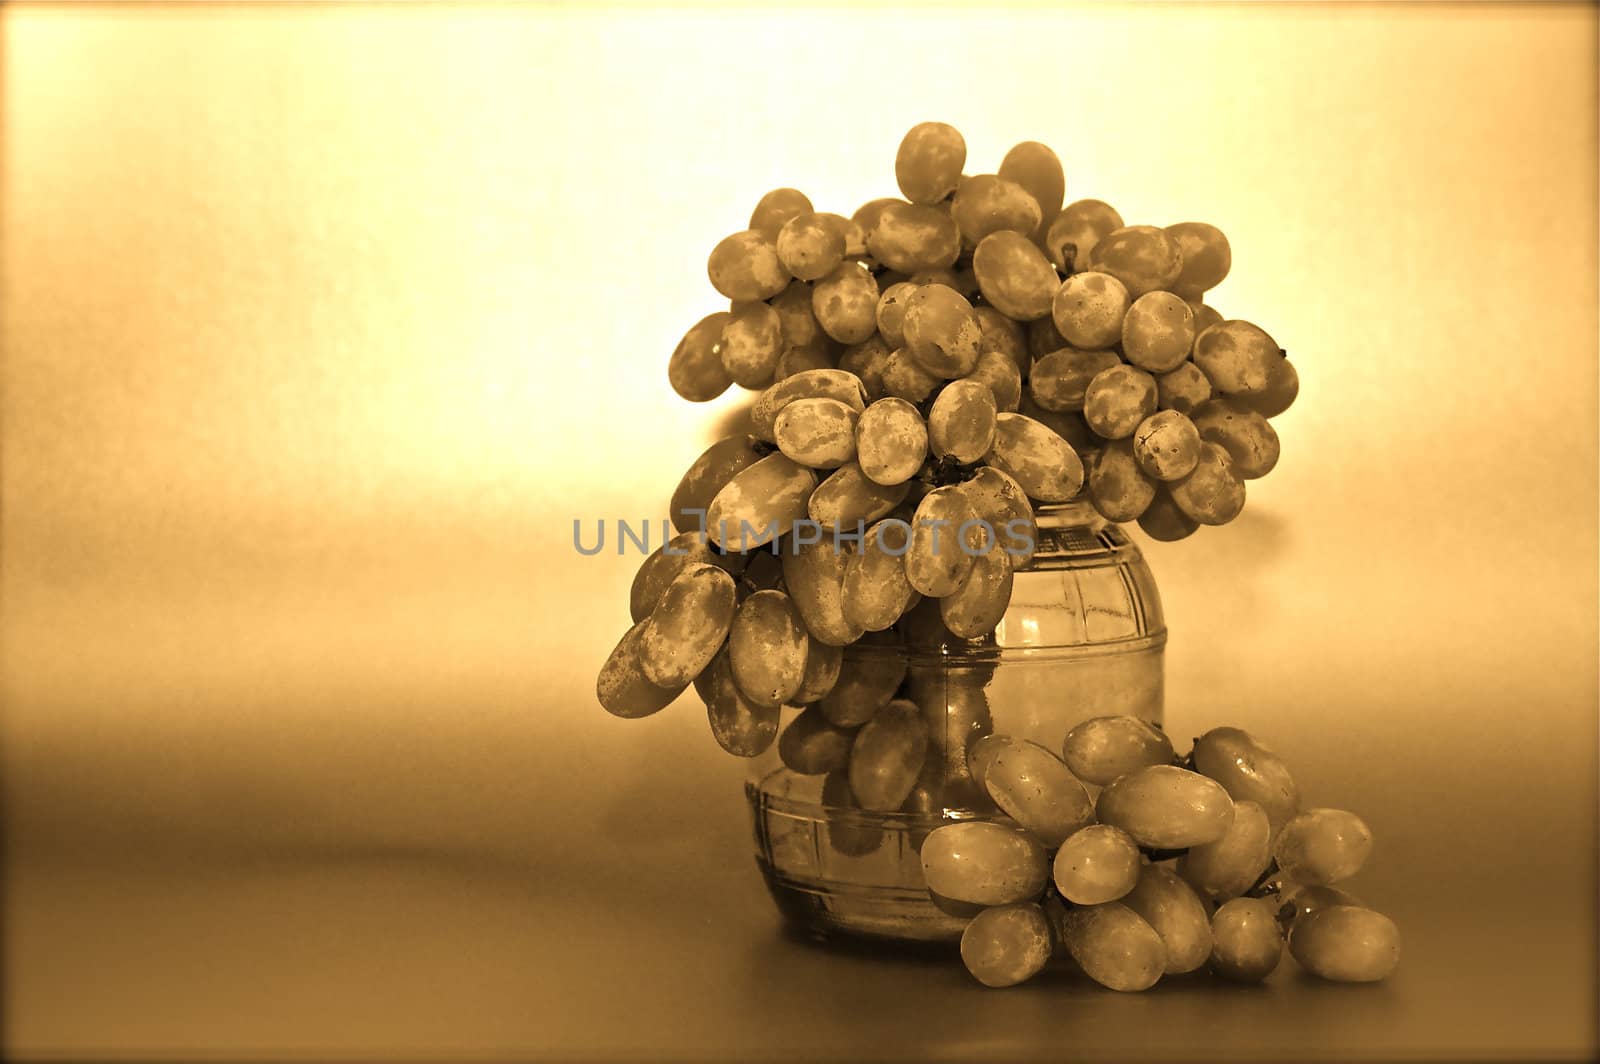 An artistic display of grapes against a plain metallic background with copy space.